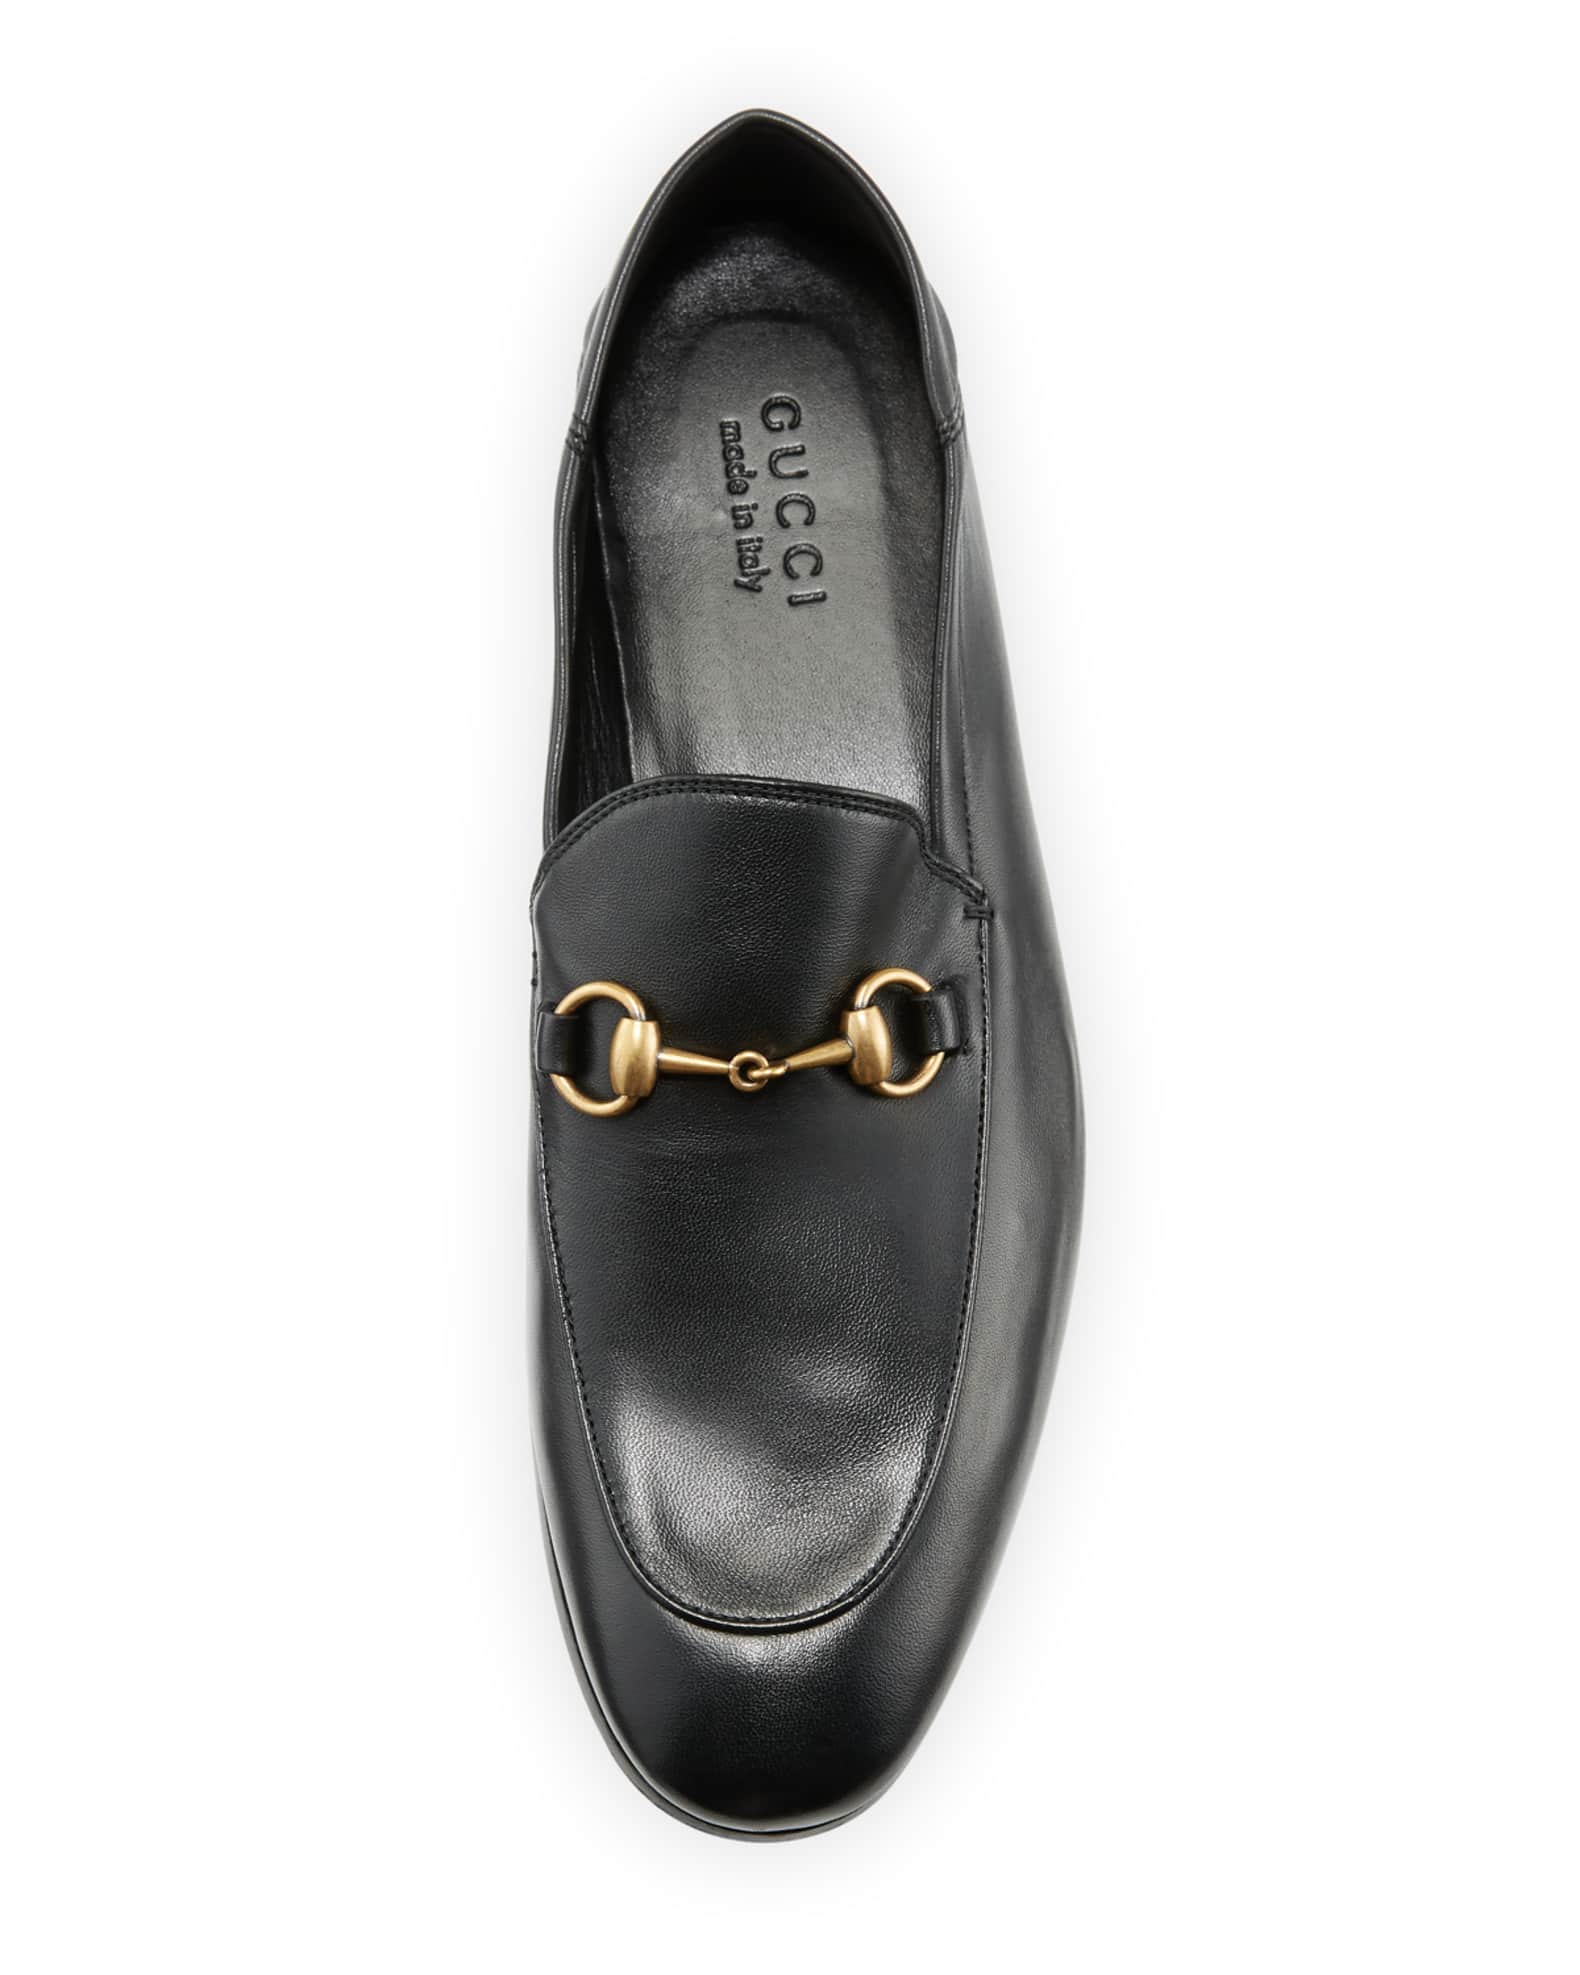 Gucci Soft Leather Bit-Strap Loafer | Neiman Marcus